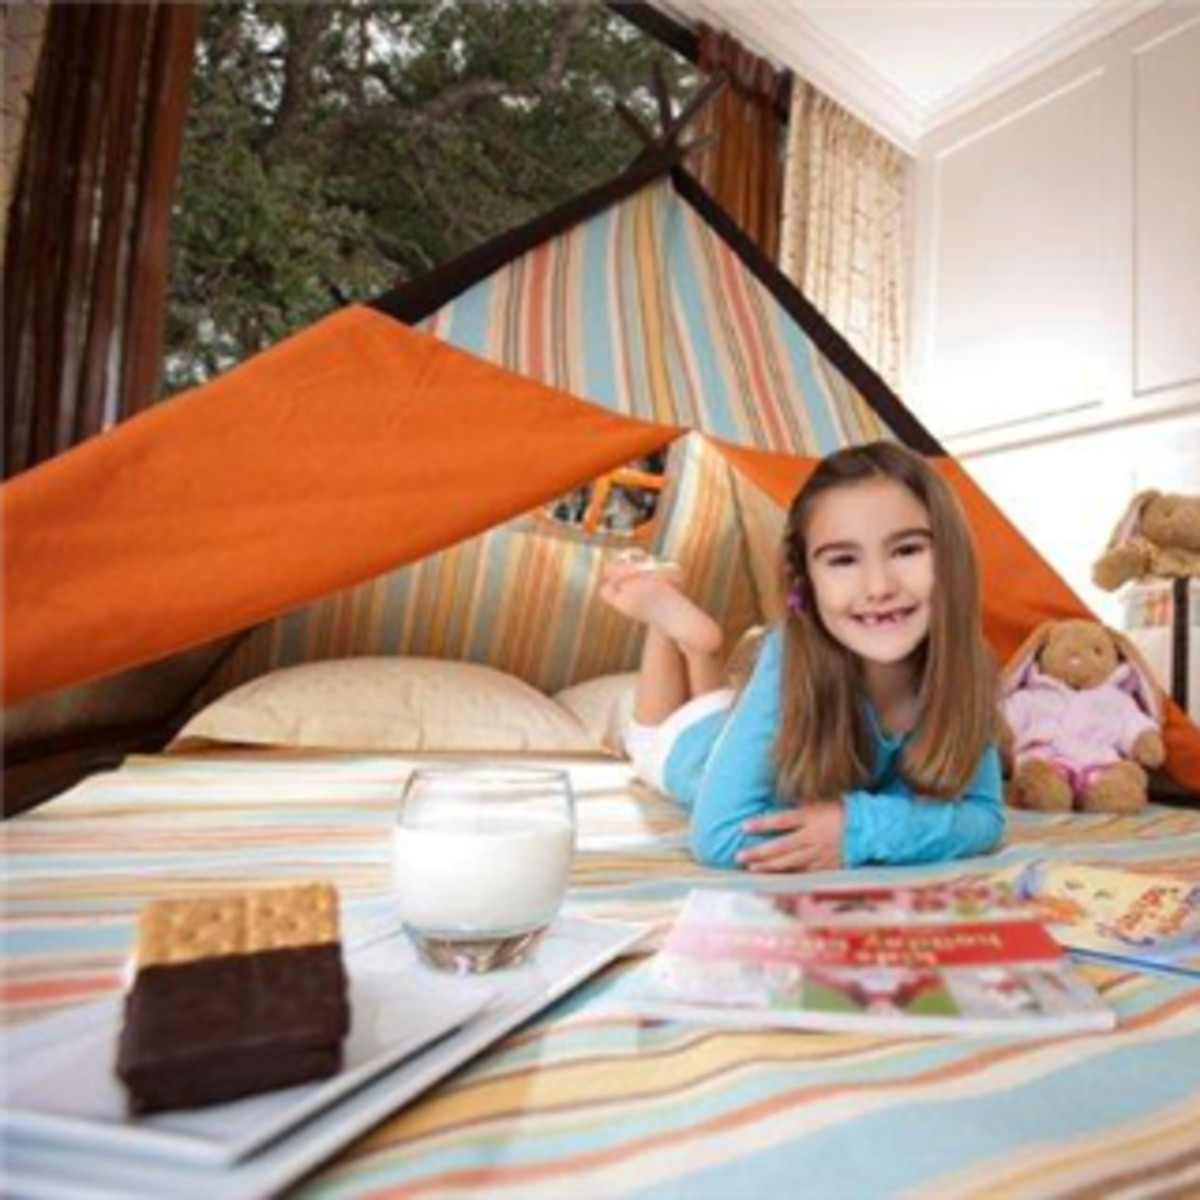 Family Glamping: 8 Hotels For Fab Faux Camping #glamping #camping #vacation www.TodaysMama.com